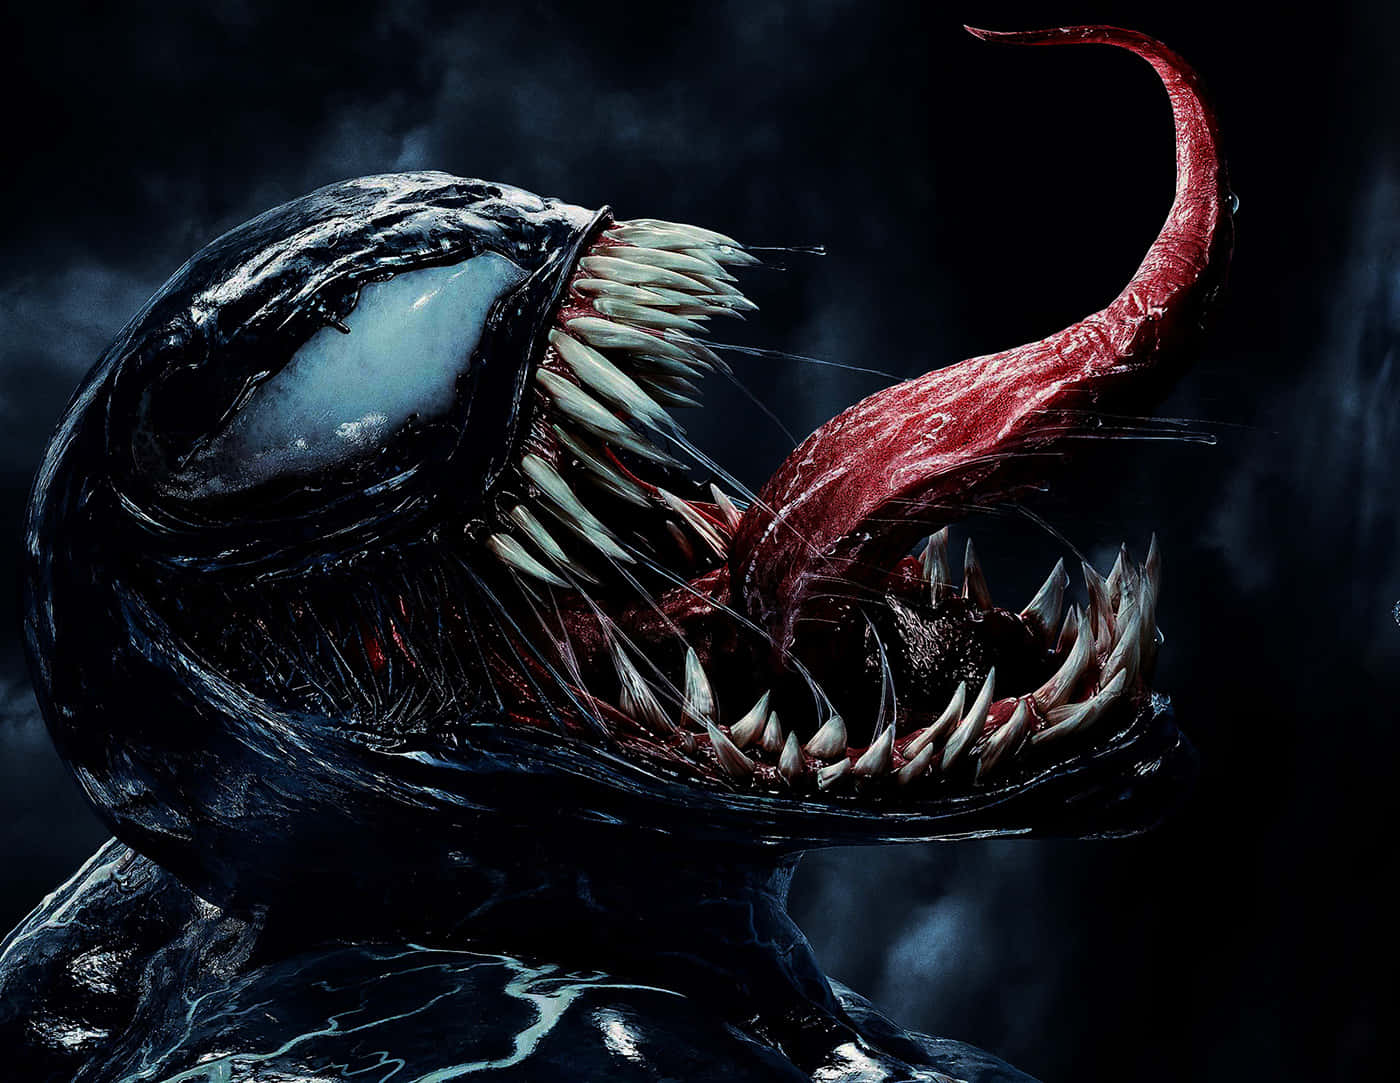 Kännvenom's Krafter. (this Would Be A Suitable Slogan For A Wallpaper Featuring The Marvel Character Venom.)